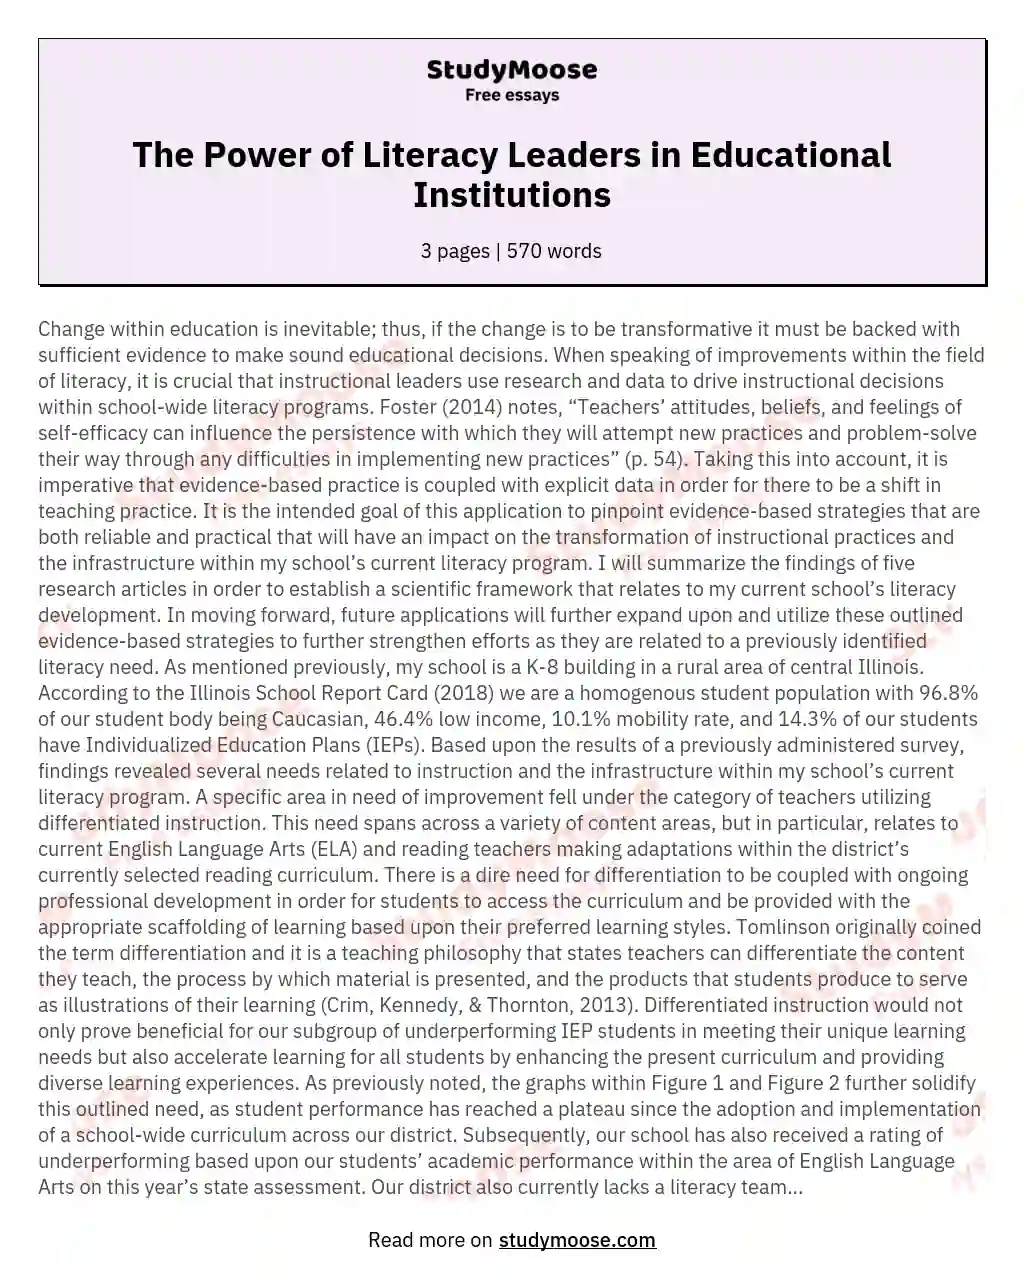 The Power of Literacy Leaders in Educational Institutions essay